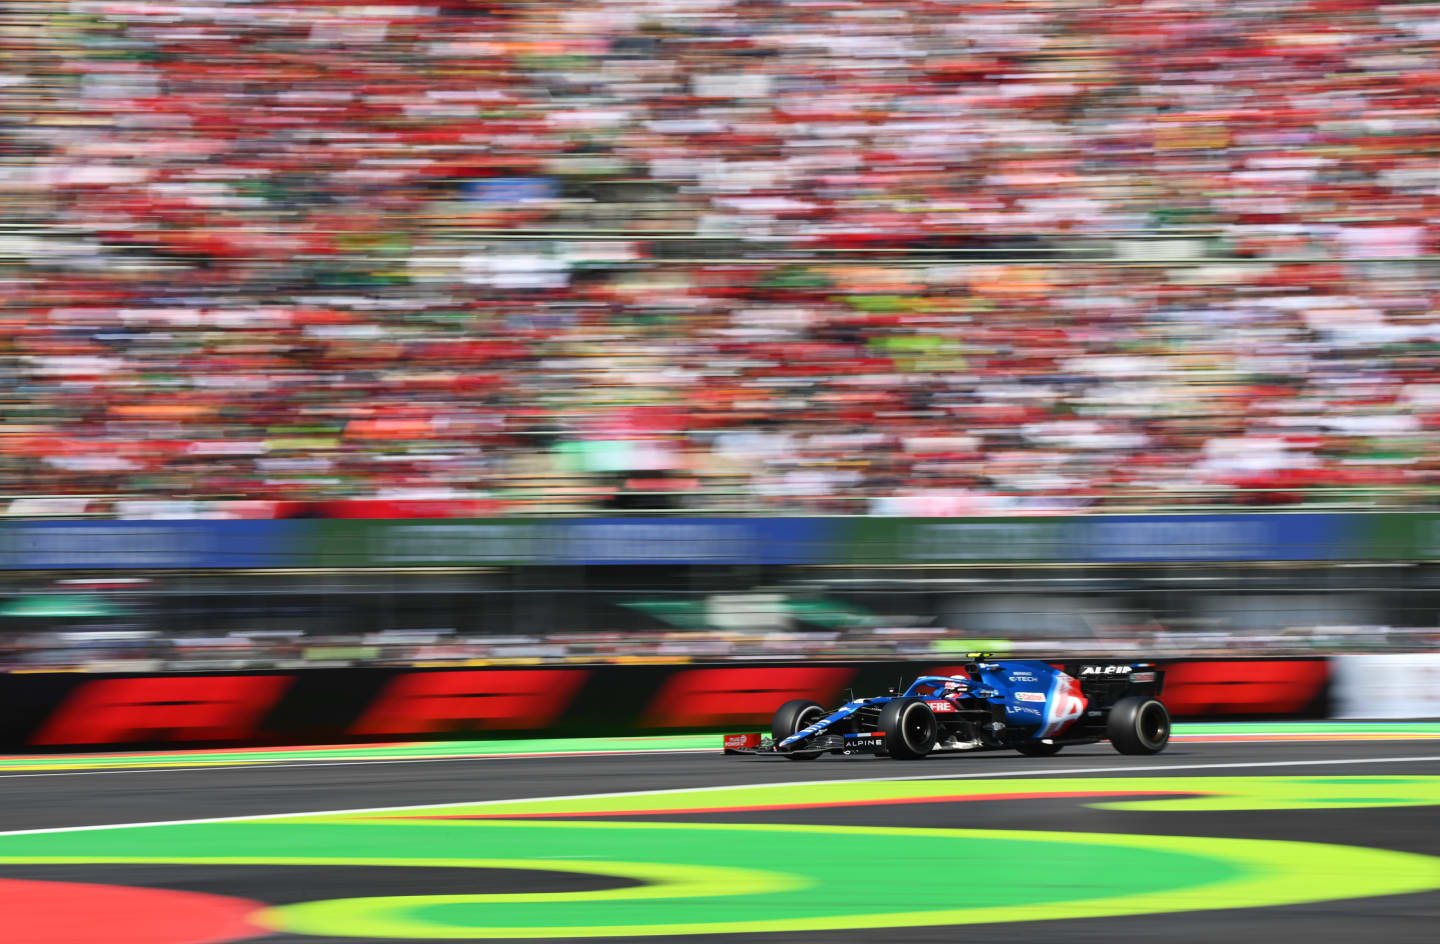 MEXICO CITY, MEXICO - NOVEMBER 07: Esteban Ocon of France driving the (31) Alpine A521 Renault on track during the F1 Grand Prix of Mexico at Autodromo Hermanos Rodriguez on November 07, 2021 in Mexico City, Mexico. (Photo by Clive Mason/Getty Images)